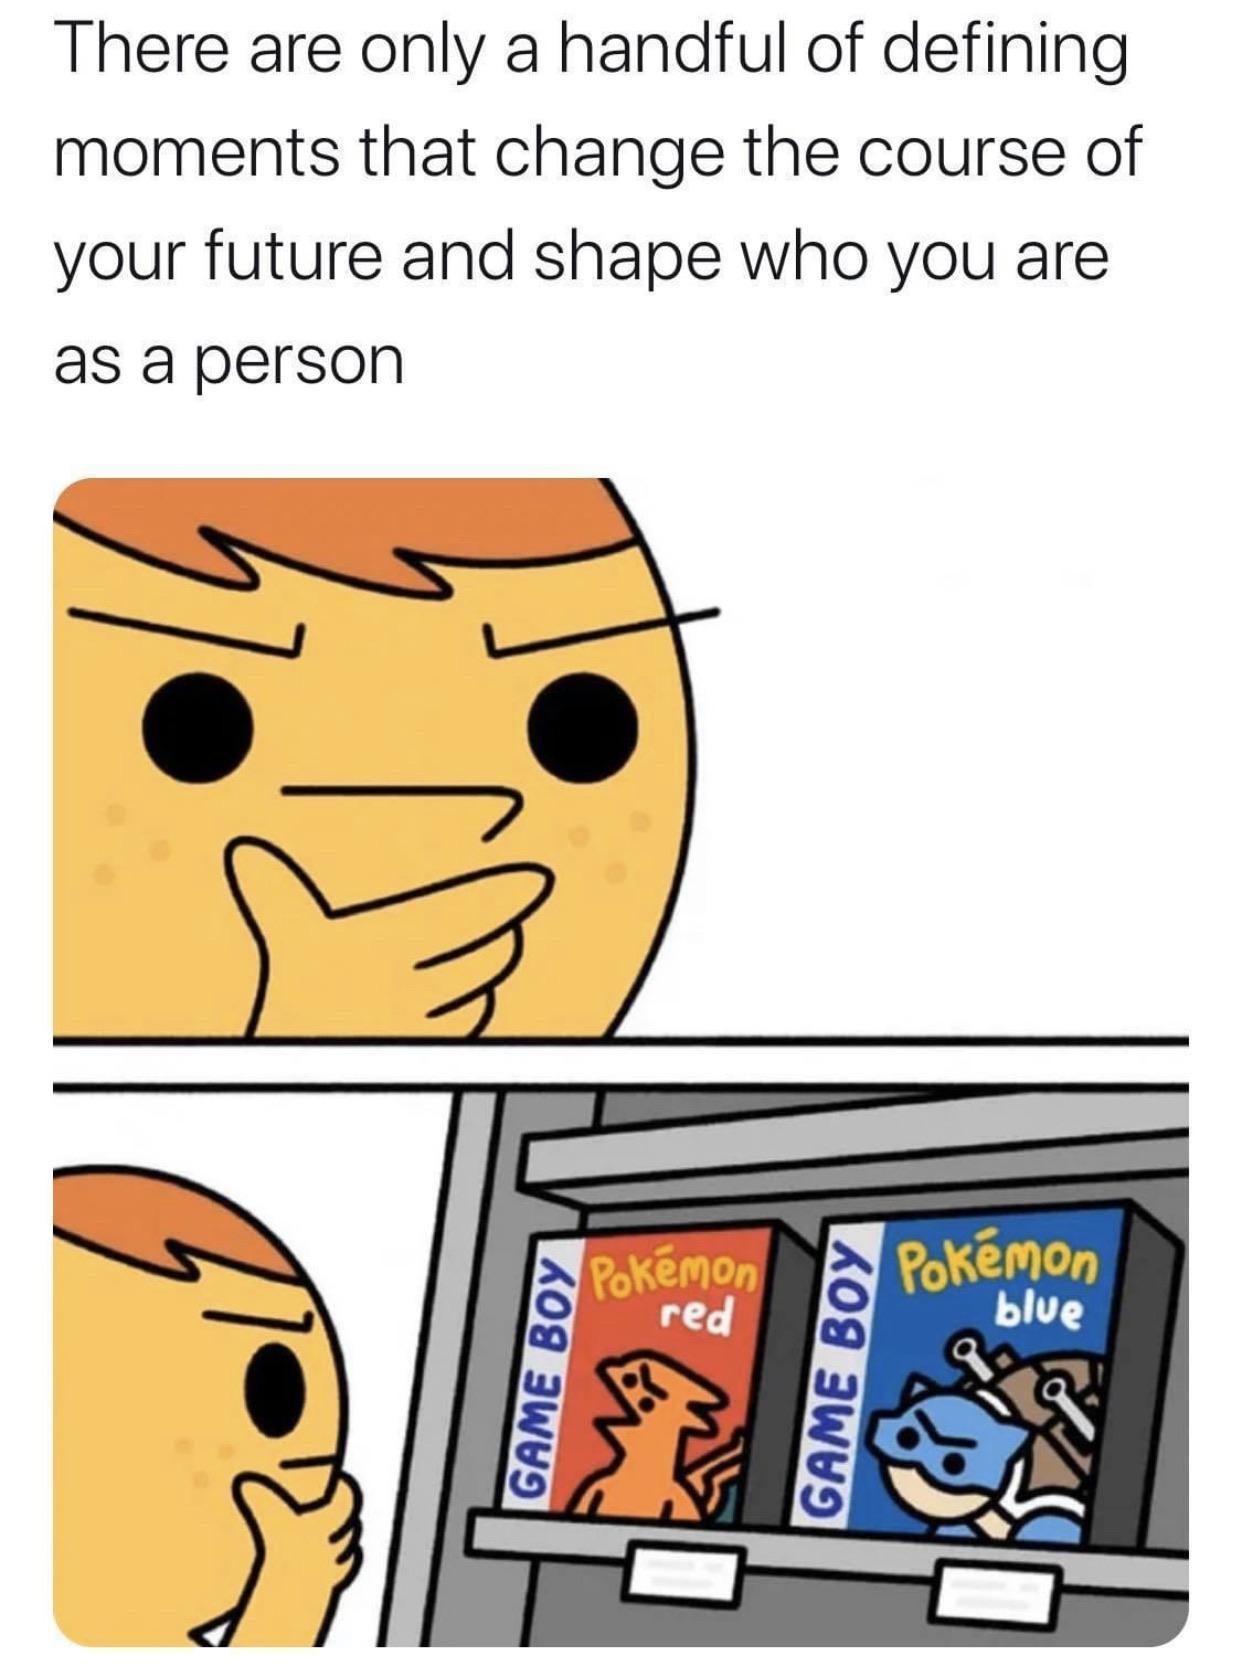 r vore_irl - There are only a handful of defining moments that change the course of your future and shape who you are as a person Pokmon red Pokmon blue Game Boy Game Boy